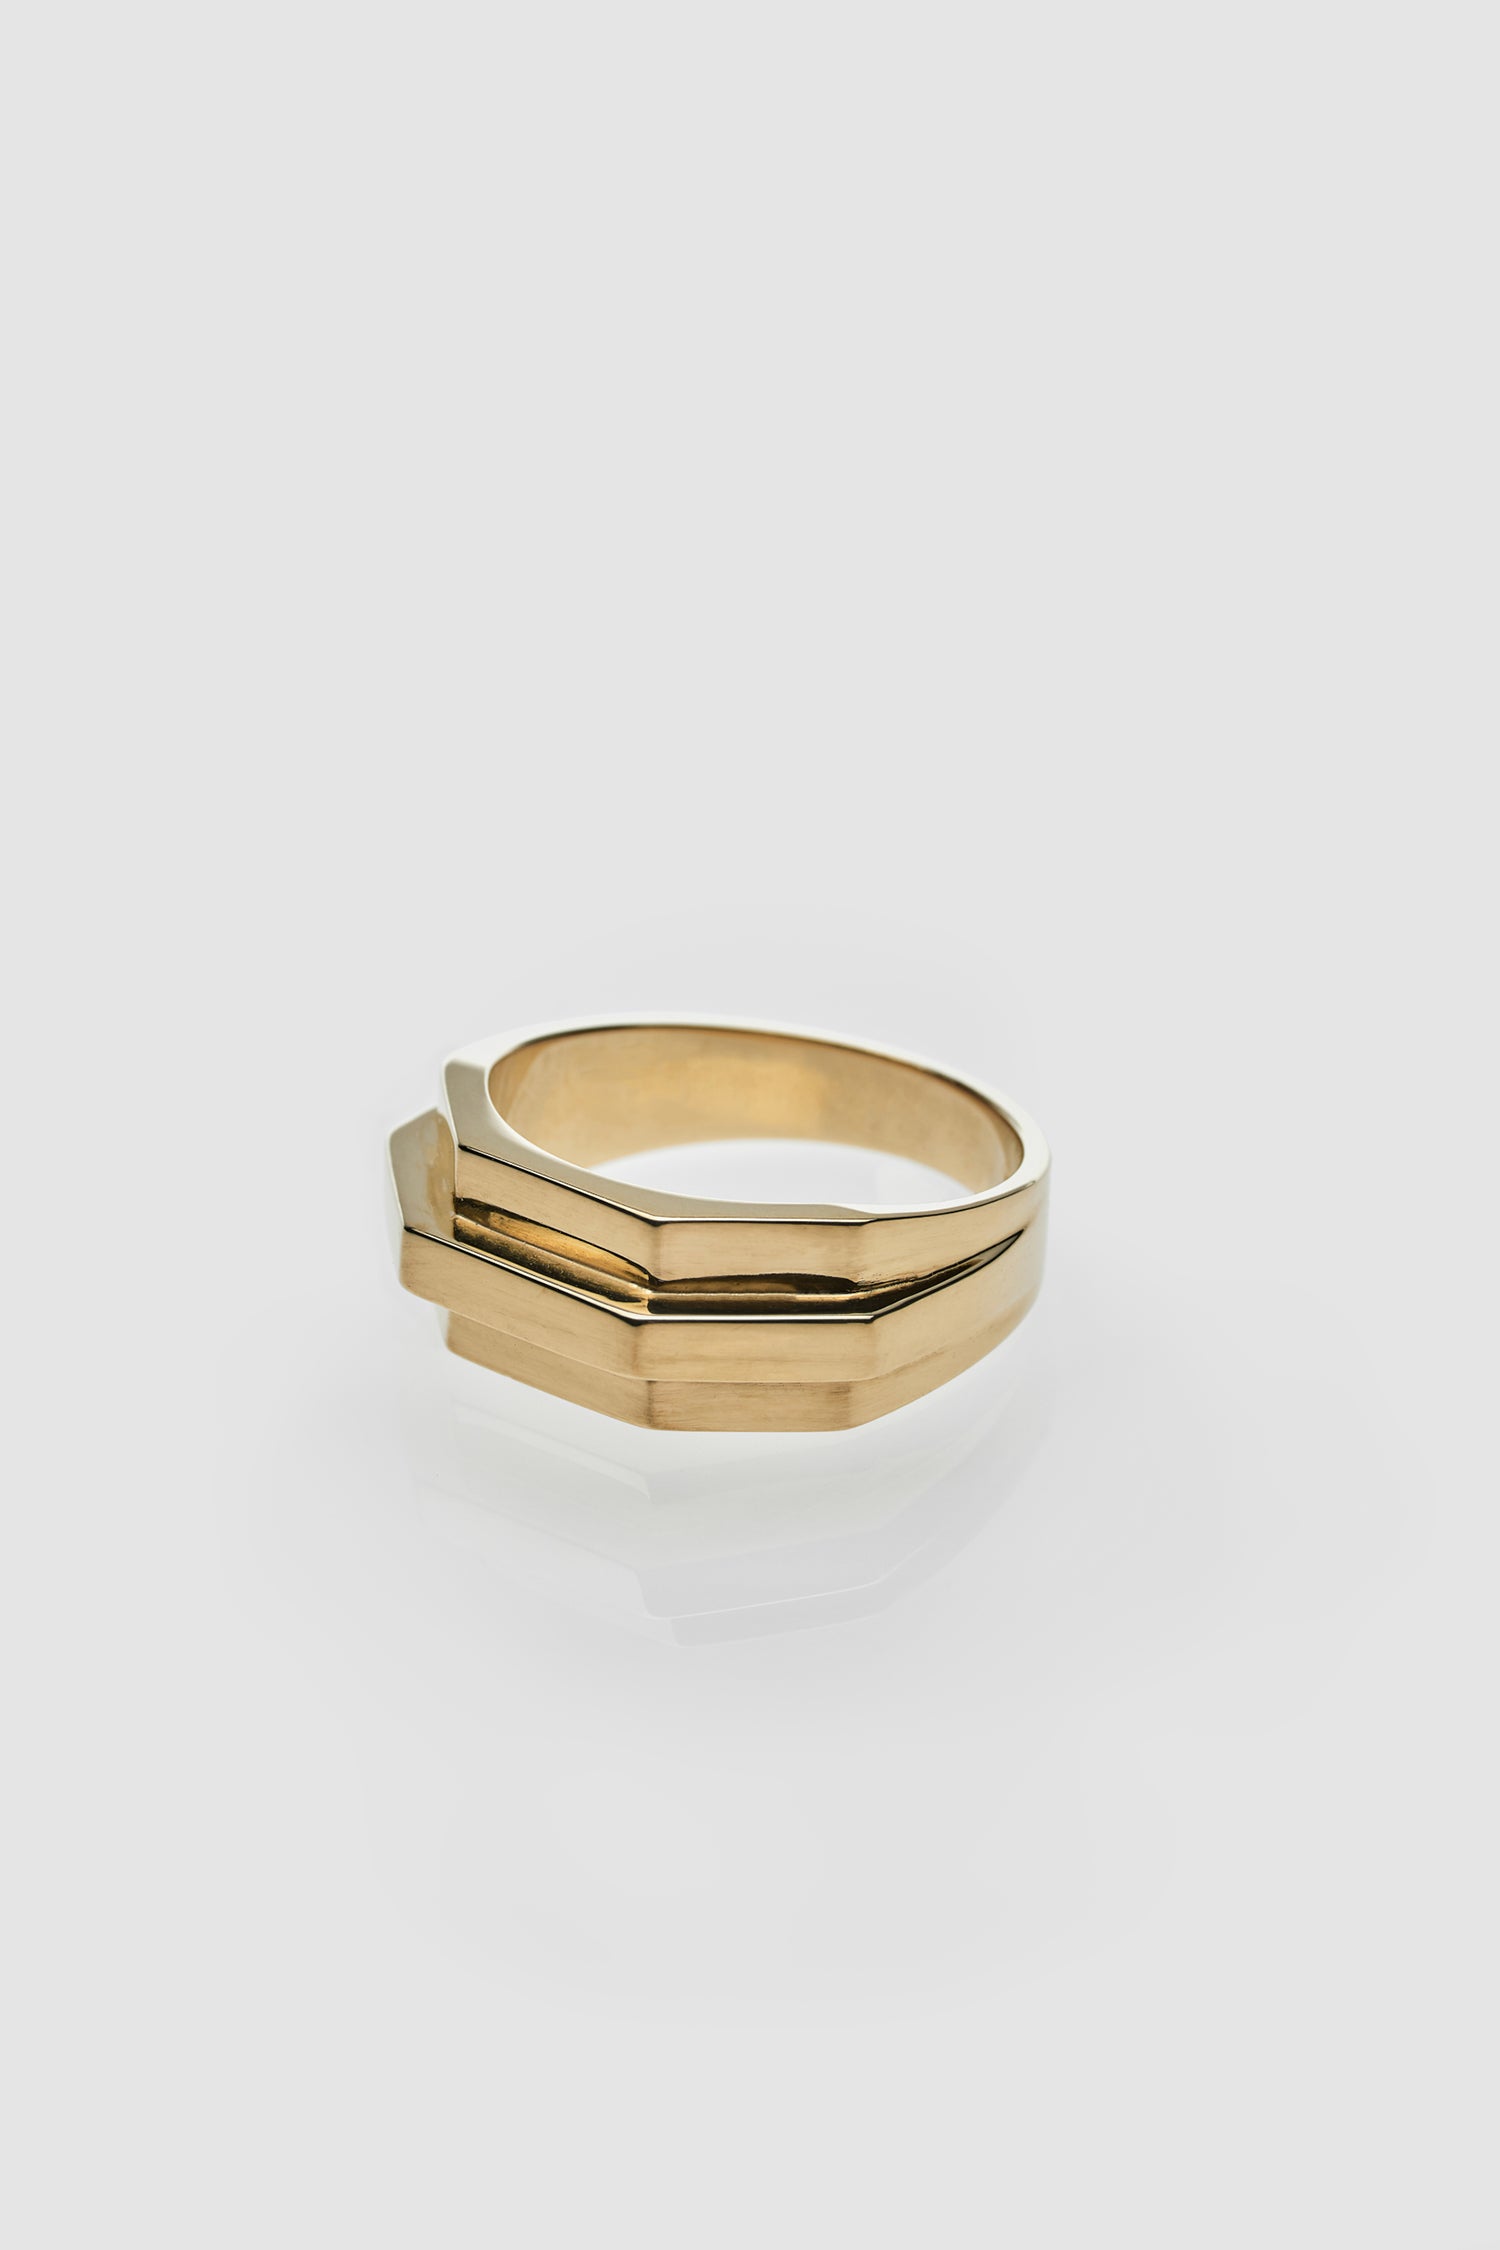 Siza Ring - Gold Plated